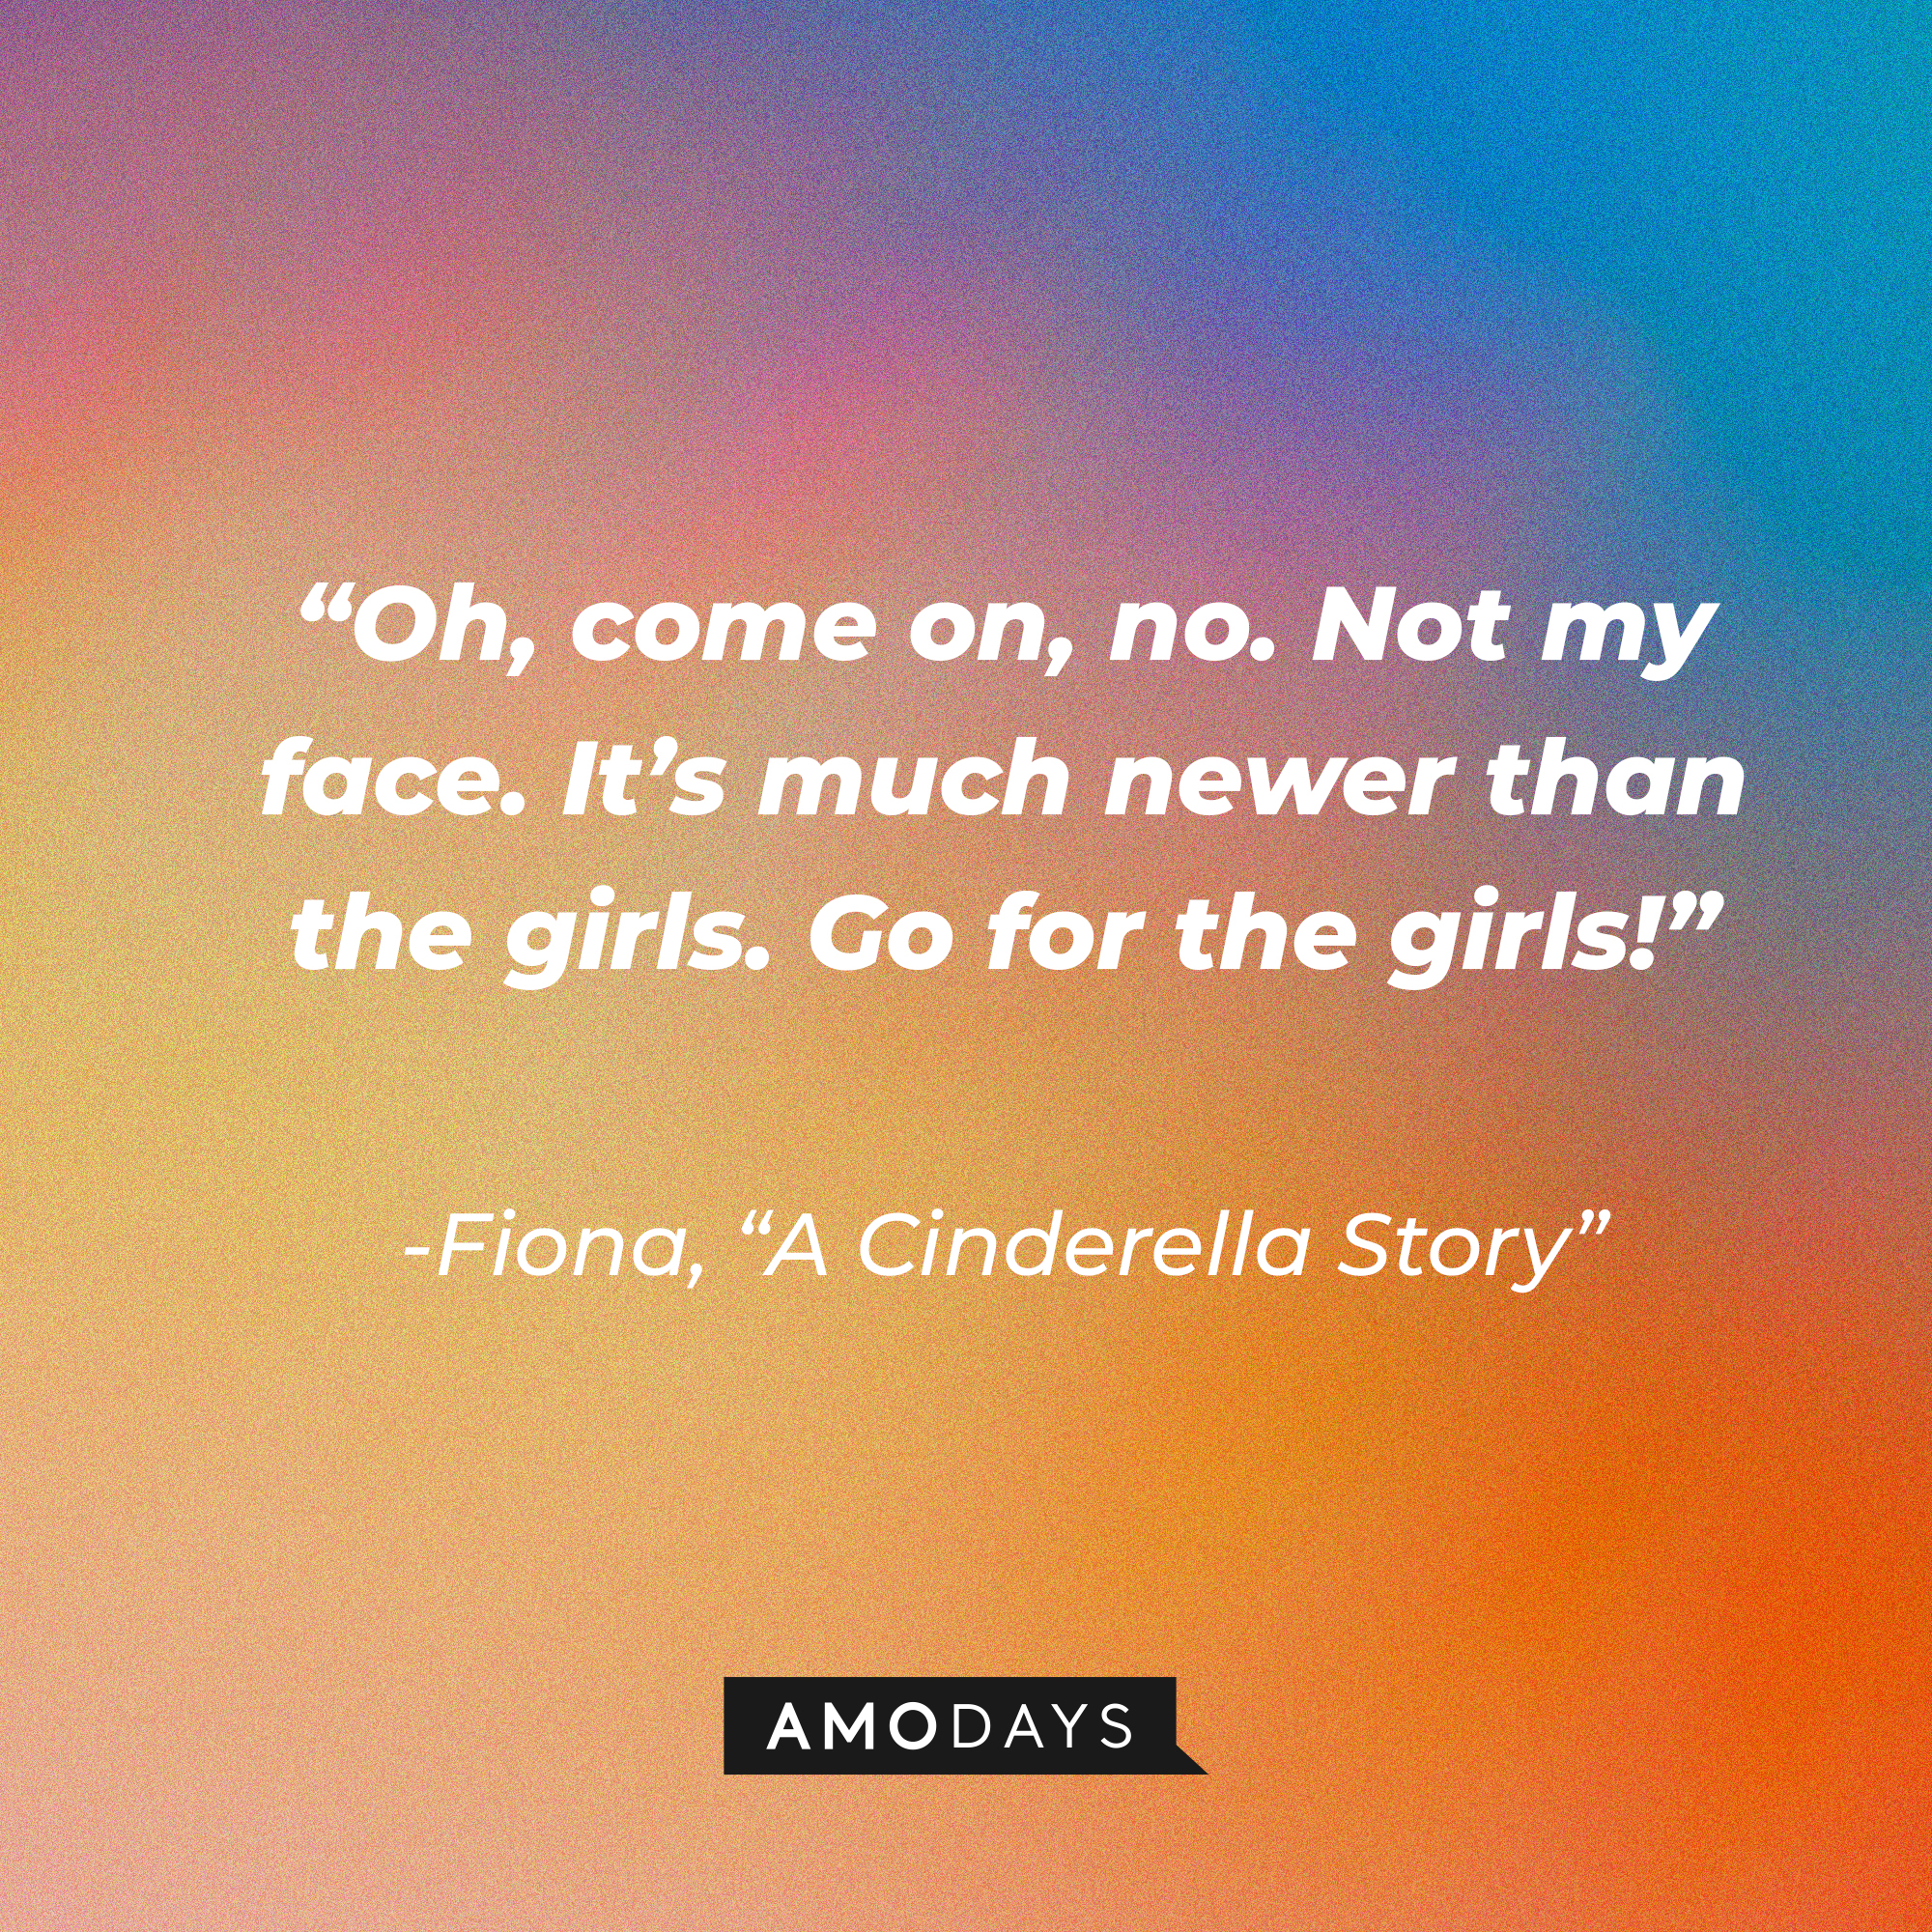 Fiona's quote from "A Cinderella Story:" “Oh, come on, no. Not my face. It’s much newer than the girls. Go for the girls!” | Source: Youtube.com/warnerbrosentertainment